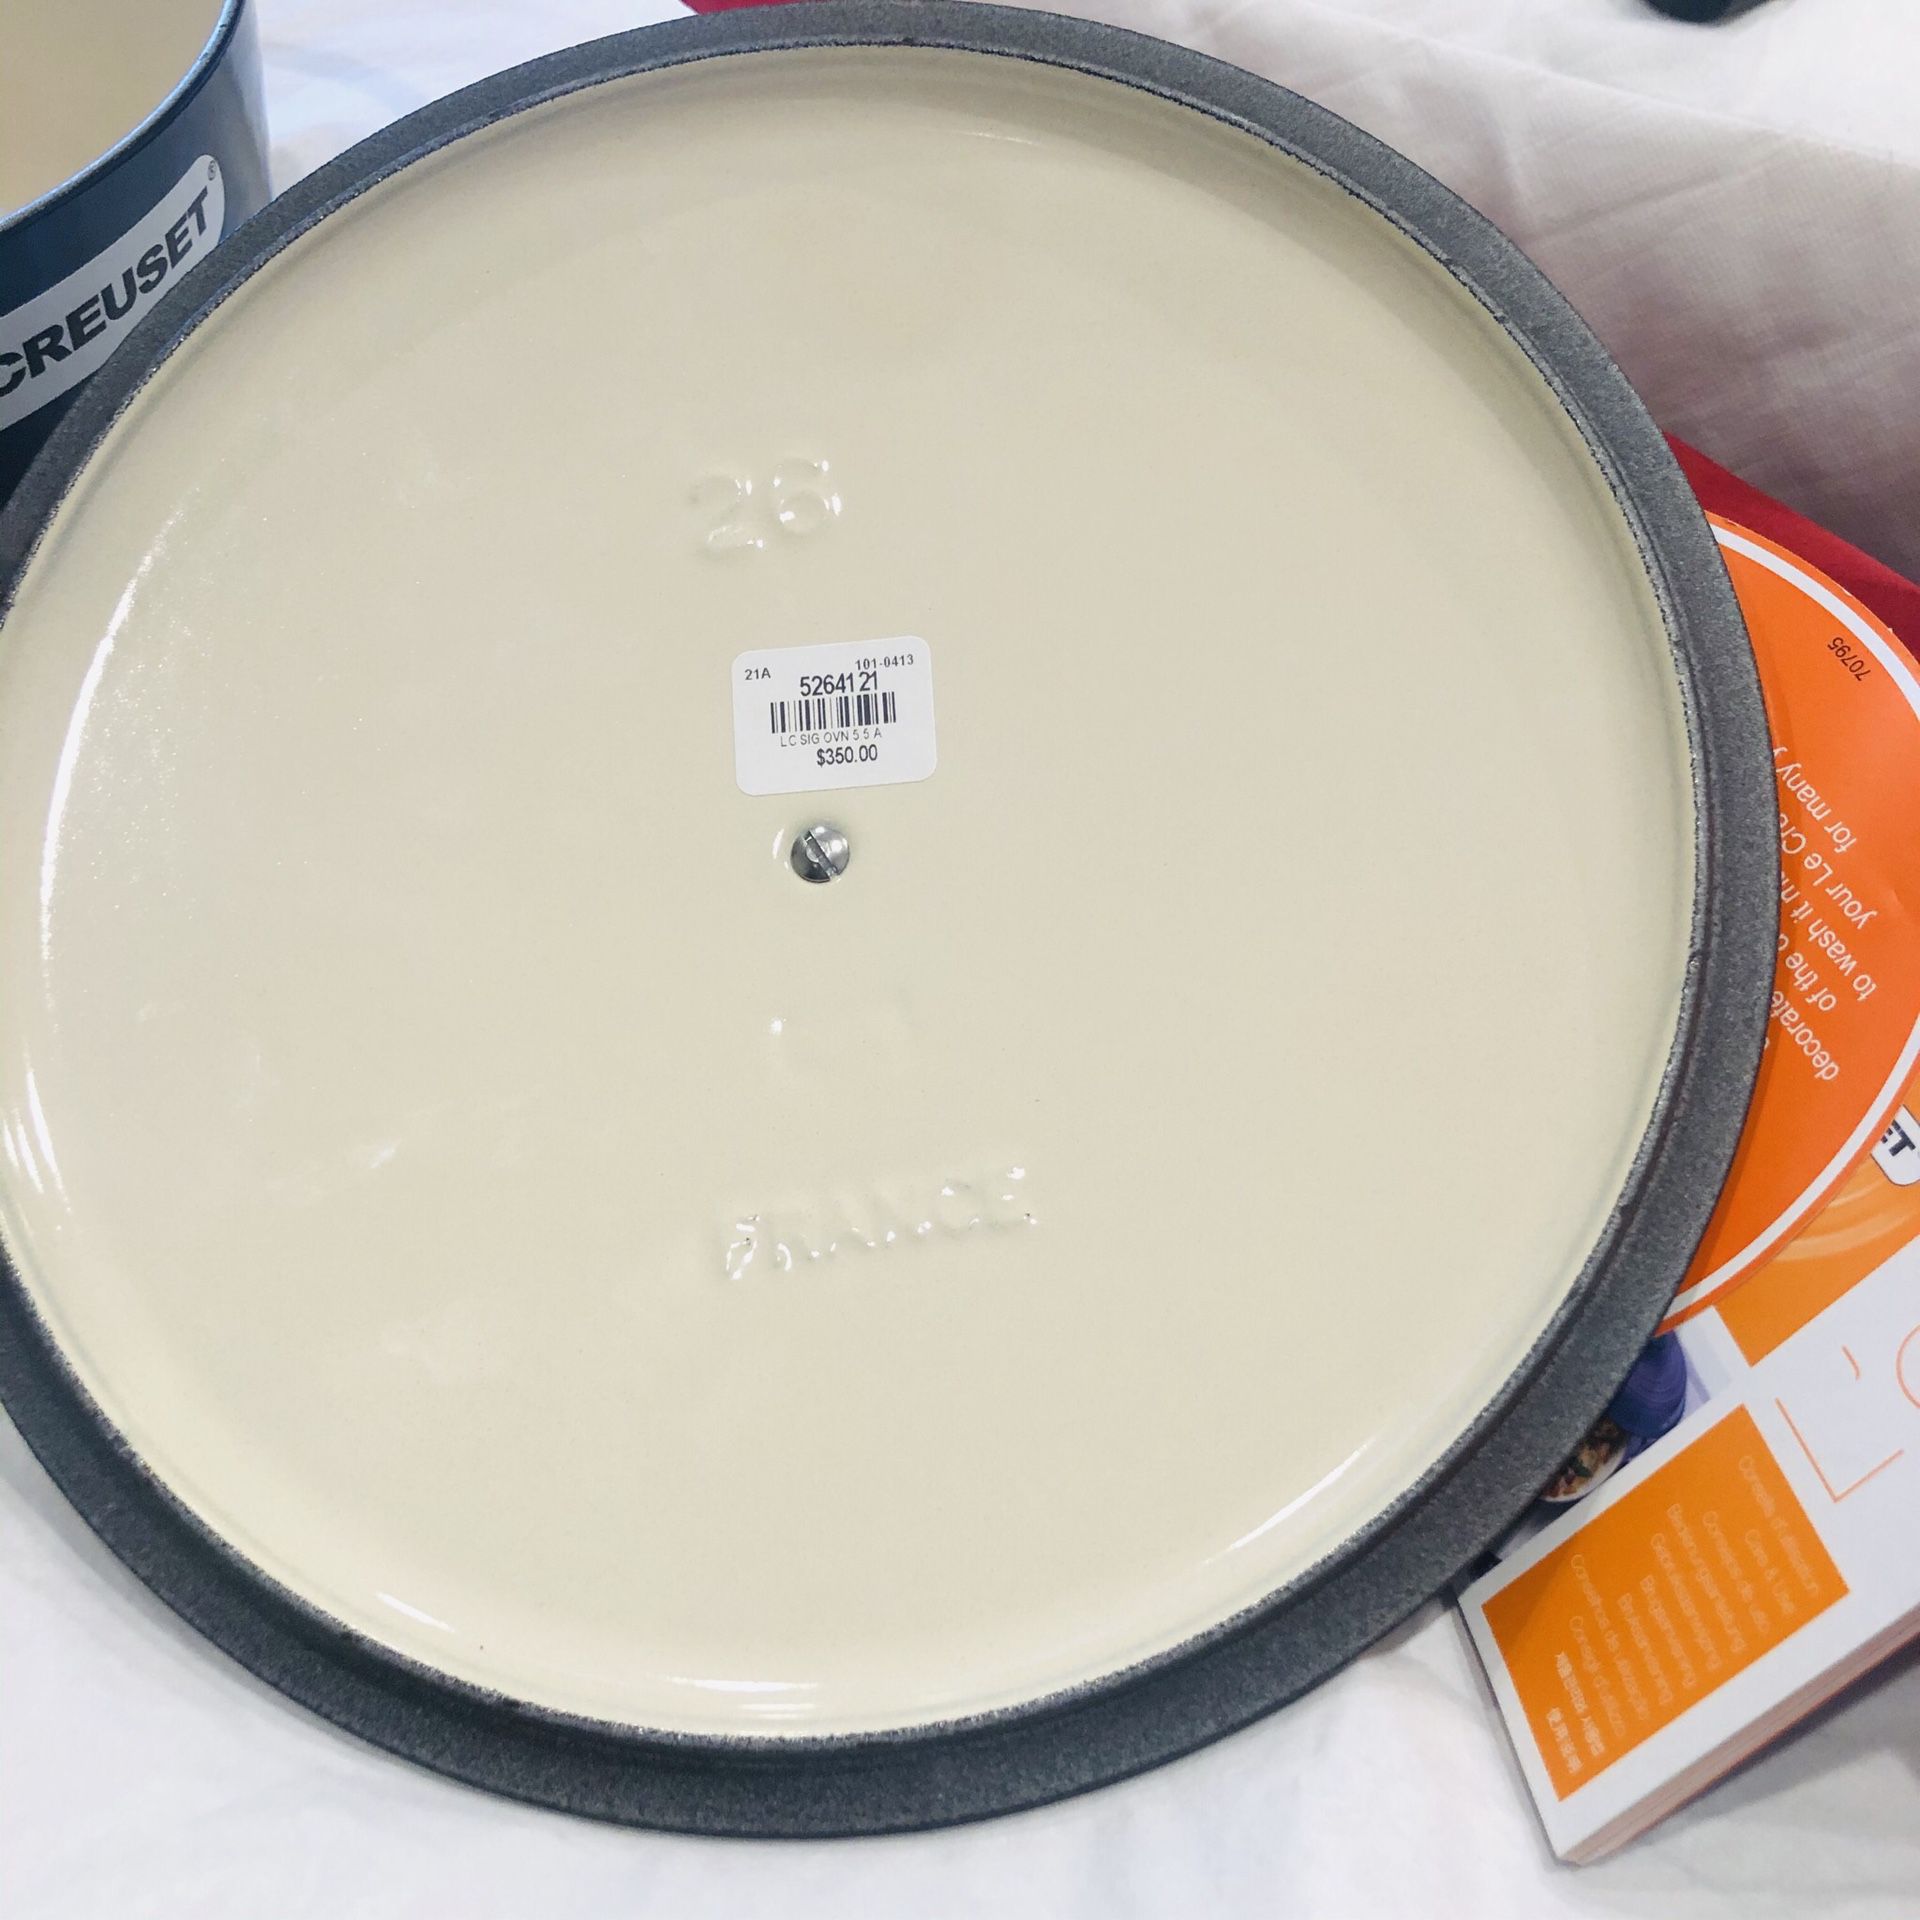 10-Qt. Dutch Oven for Sale in San Diego, CA - OfferUp